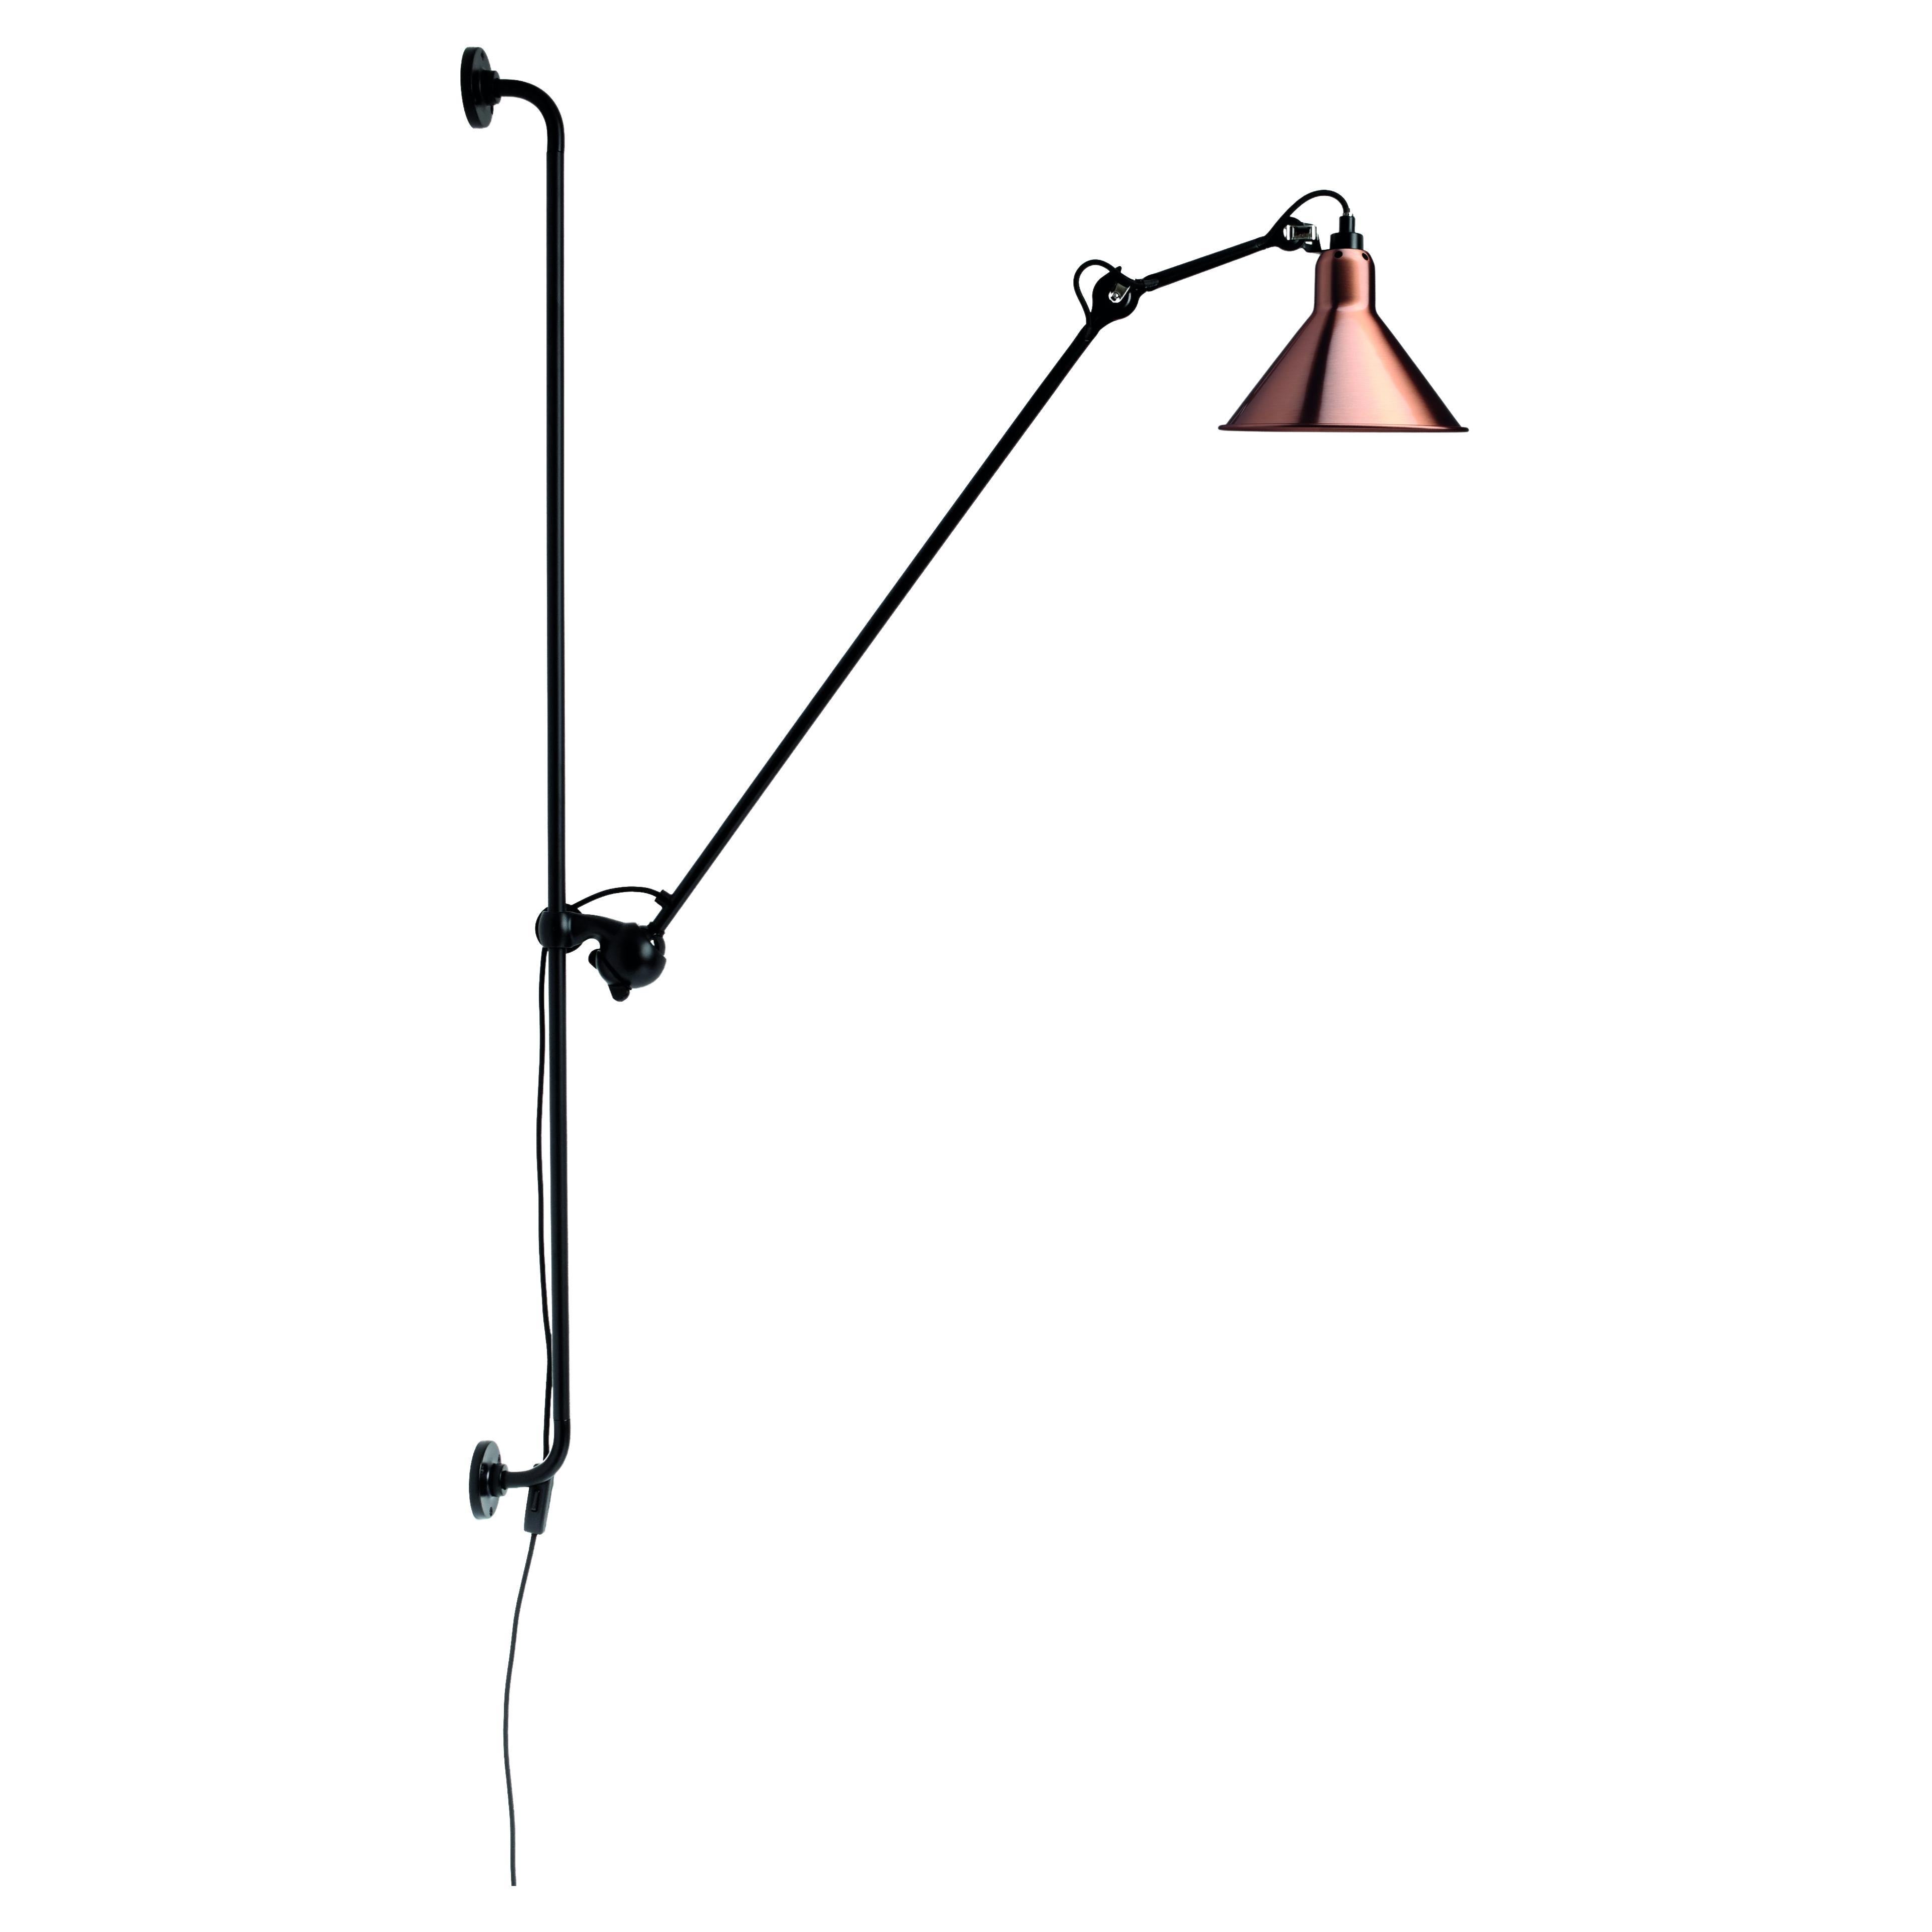 DCW Editions La Lampe Gras N°214 Conic Wall Lamp in Black Arm and Copper Shade